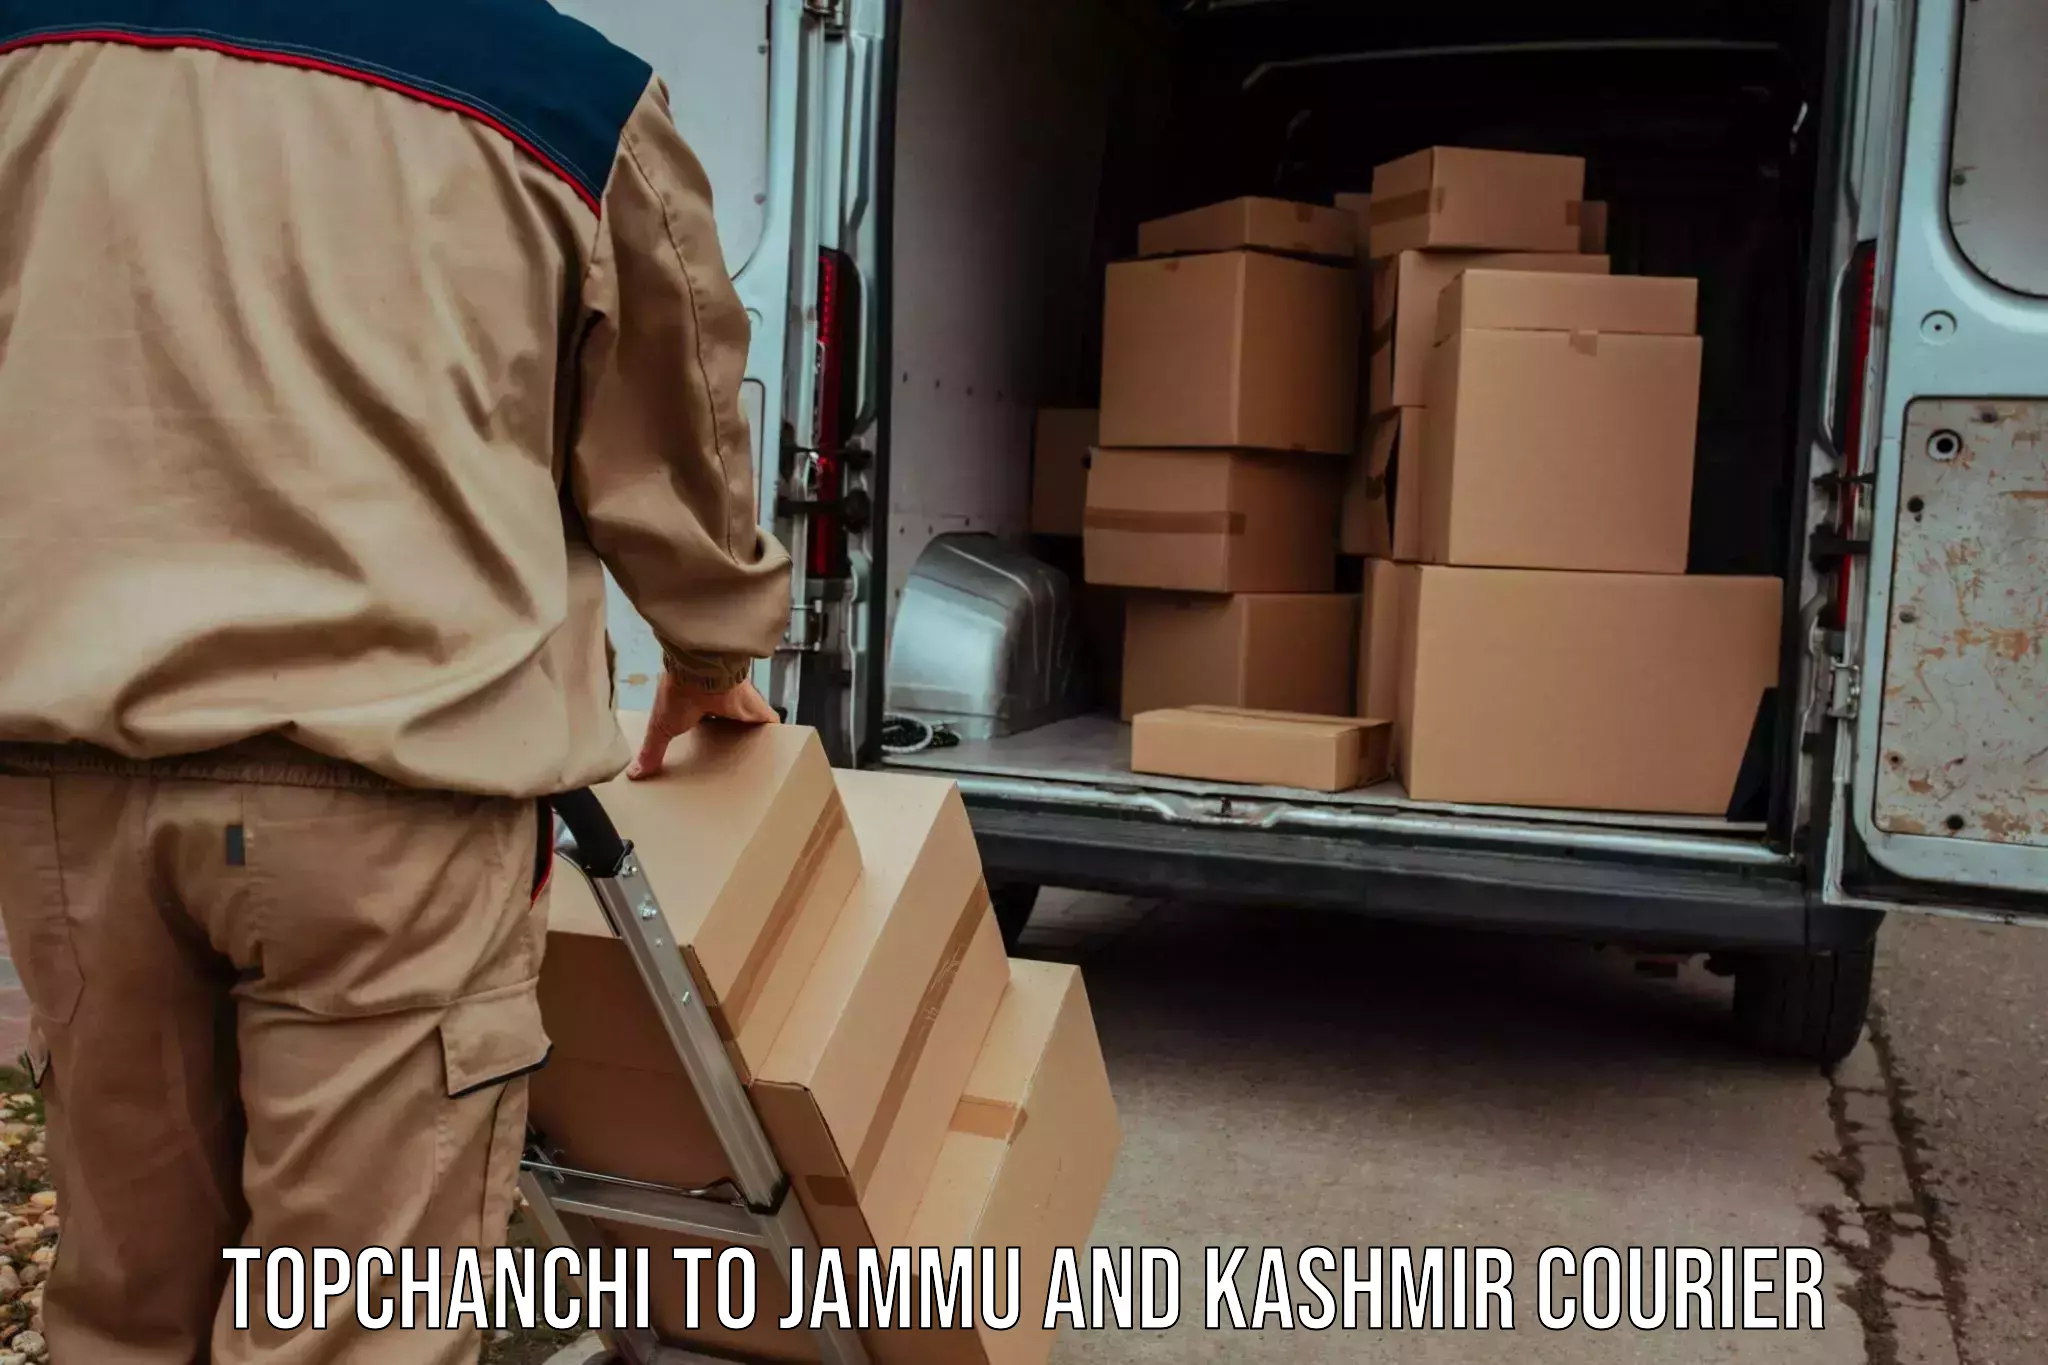 24-hour courier services Topchanchi to Jammu and Kashmir